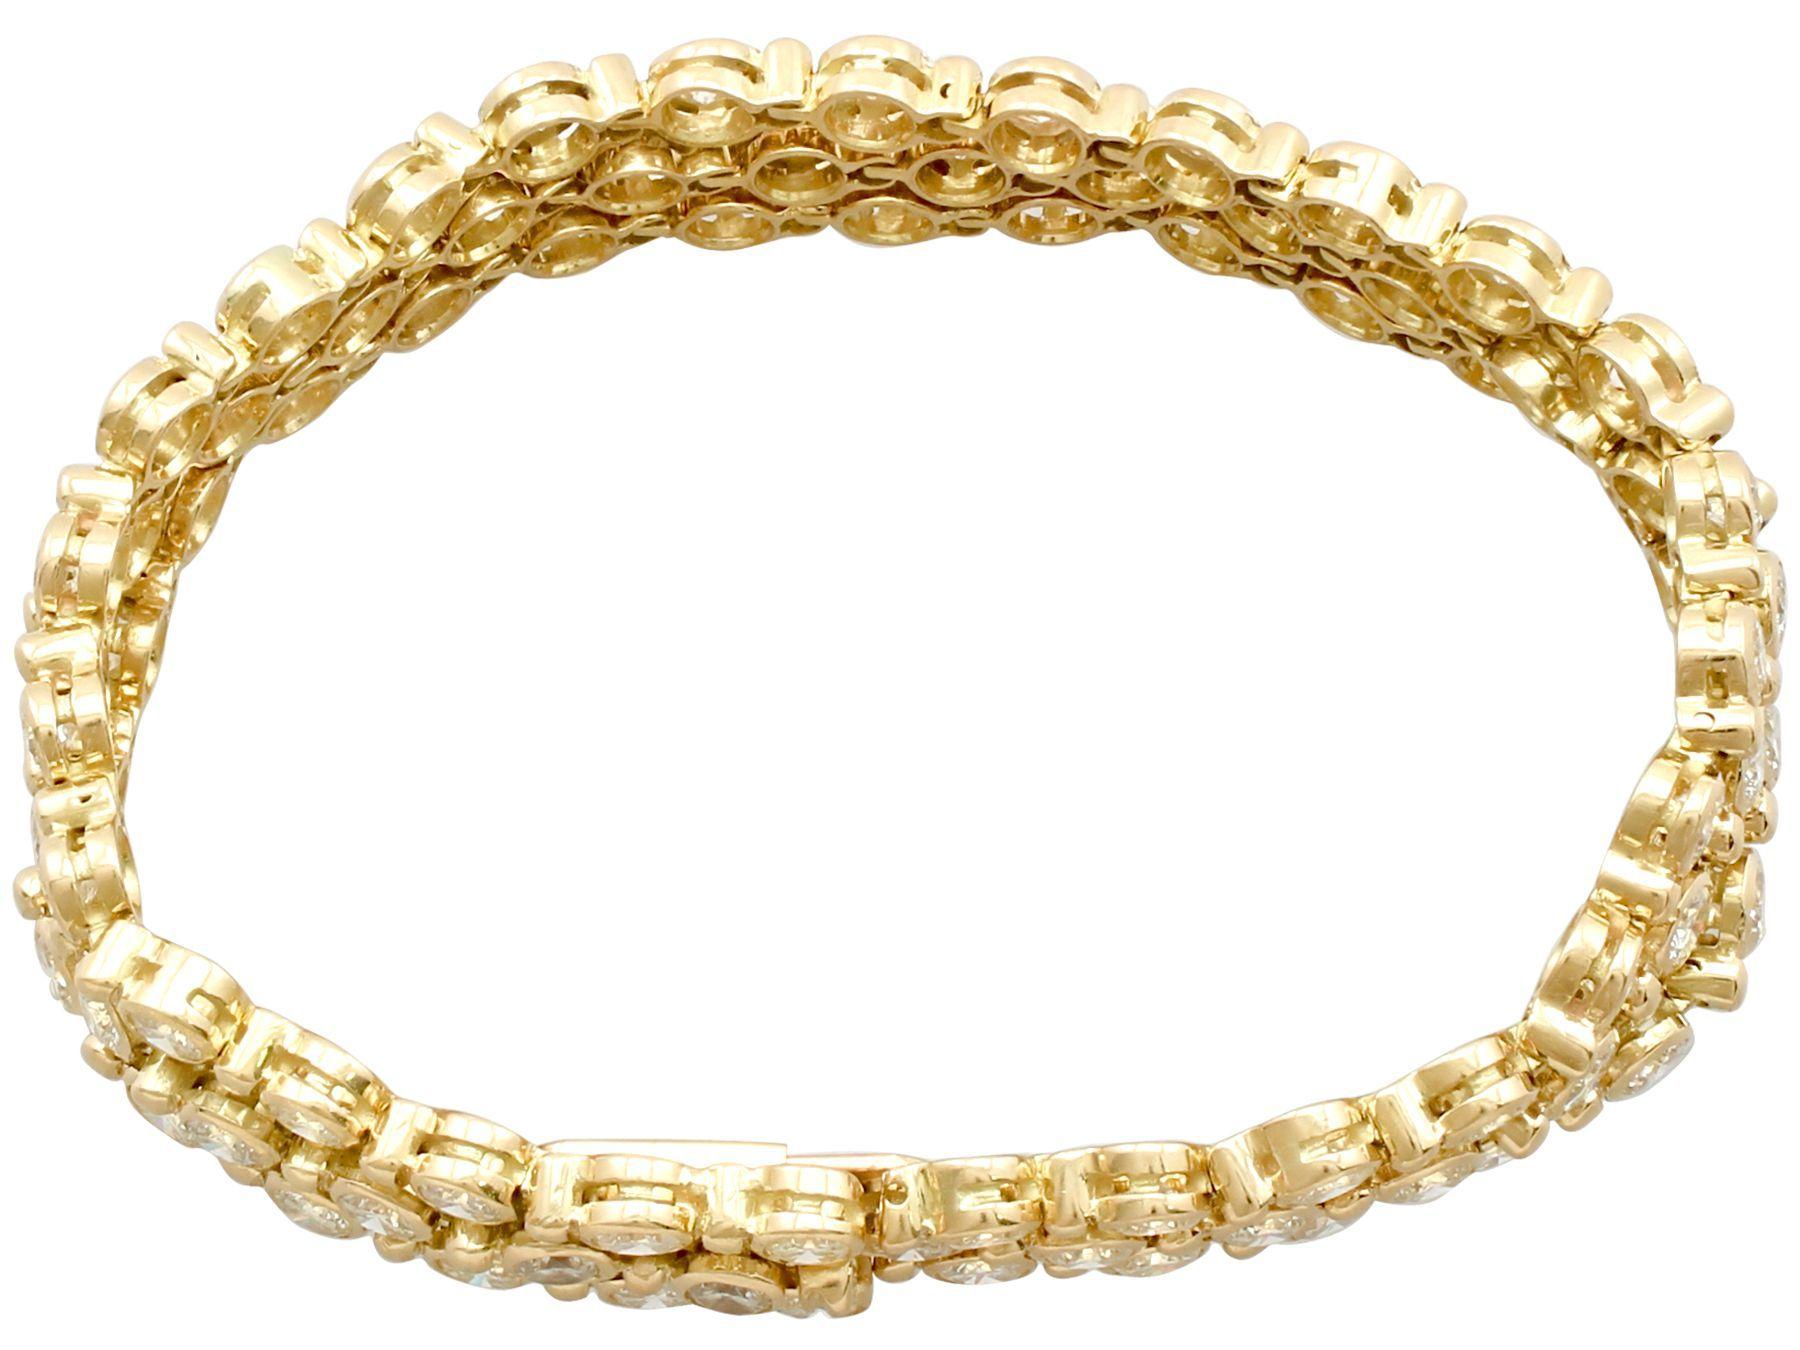 A stunning vintage 1990s French 12.96 carat diamond and 18 karat yellow gold bracelet; part of our diverse diamond jewelry and estate jewelry collections.

This stunning, fine and impressive vintage diamond bracelet has been crafted in 18k yellow